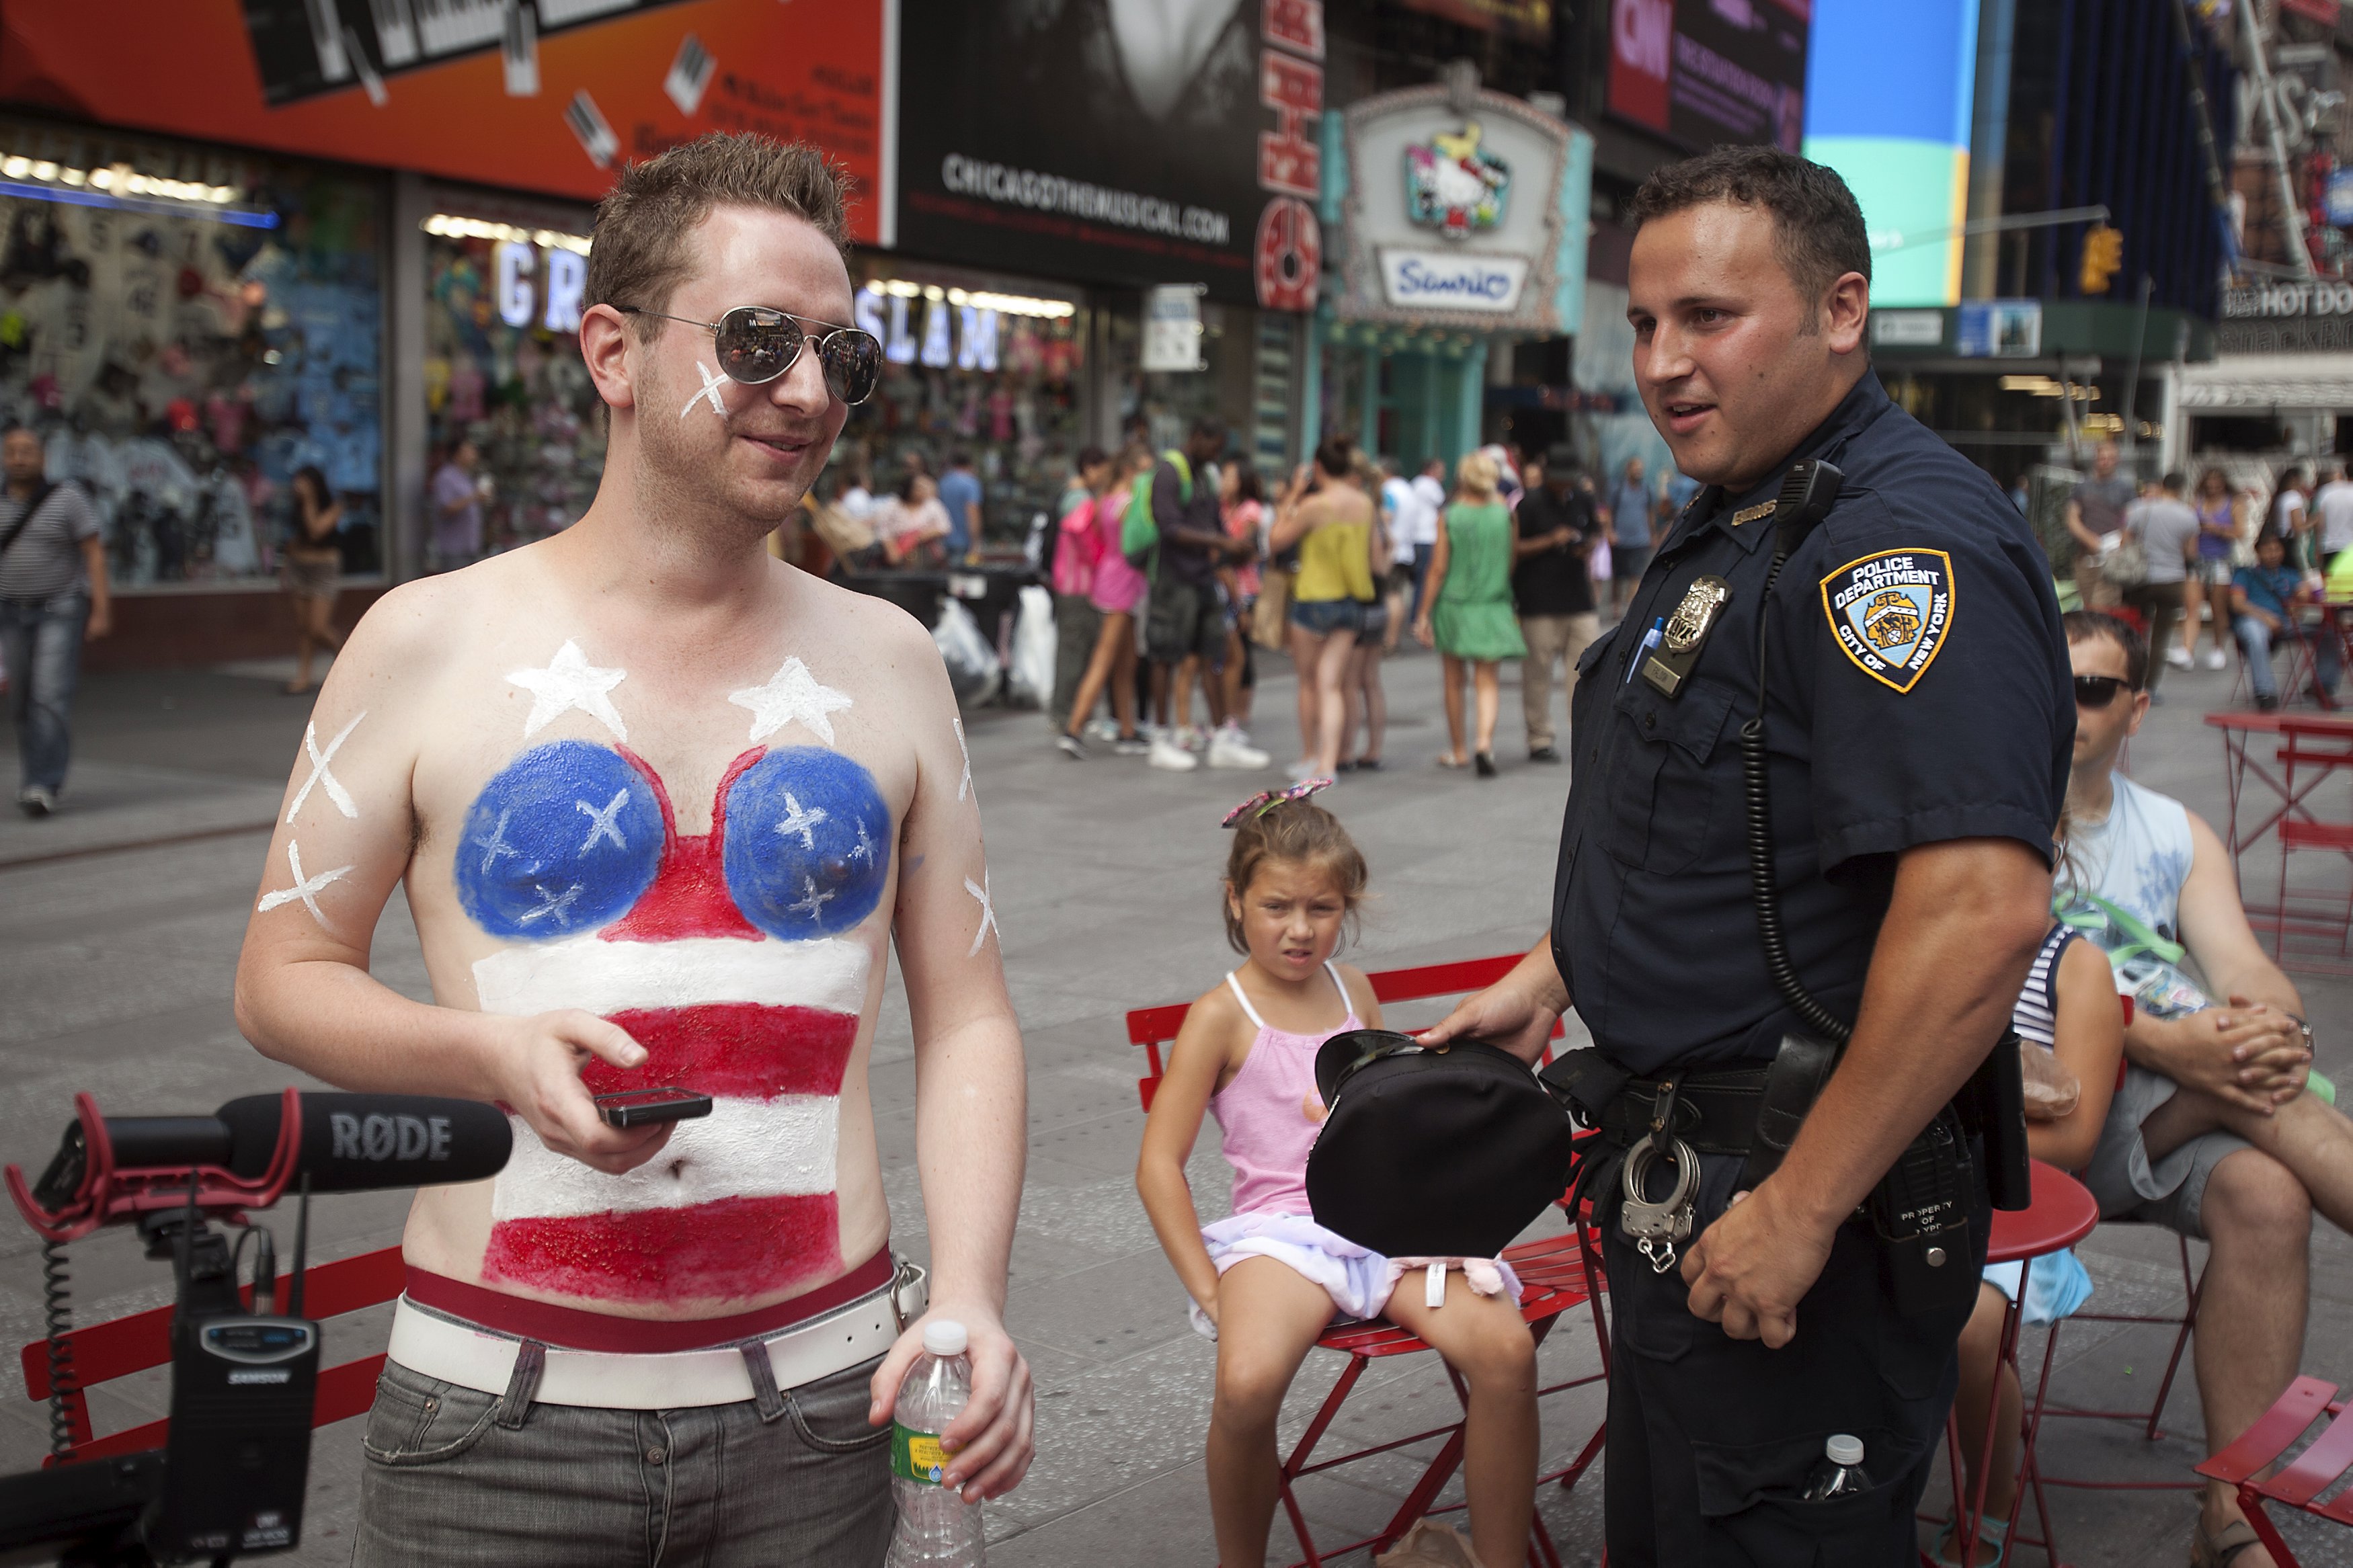 Stunning: Hundreds Go Naked in Times Square for Body 